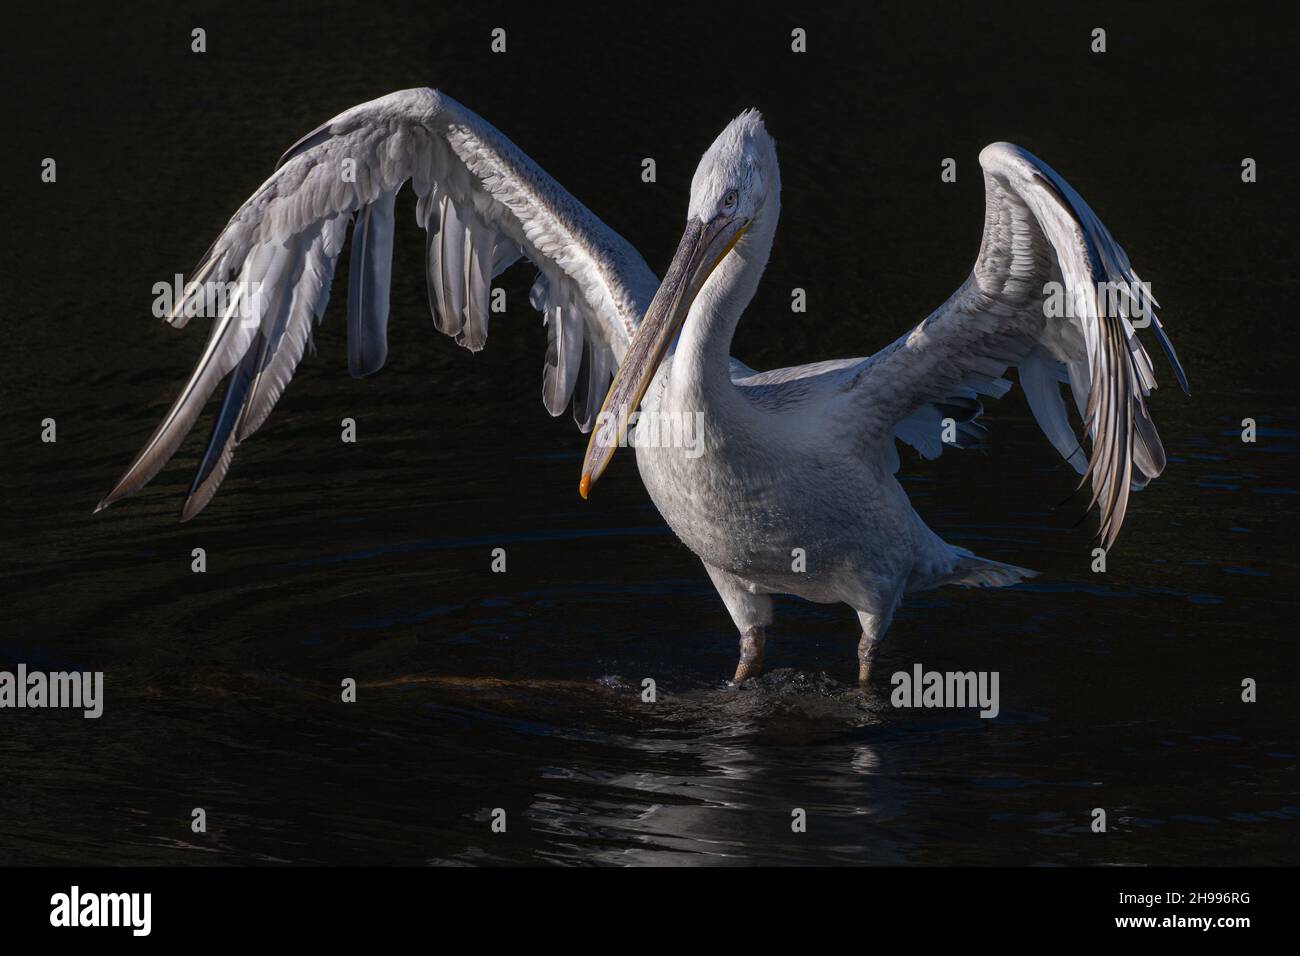 Fine art image of a Dalmatian pelican with wings spread out on a dark background Stock Photo